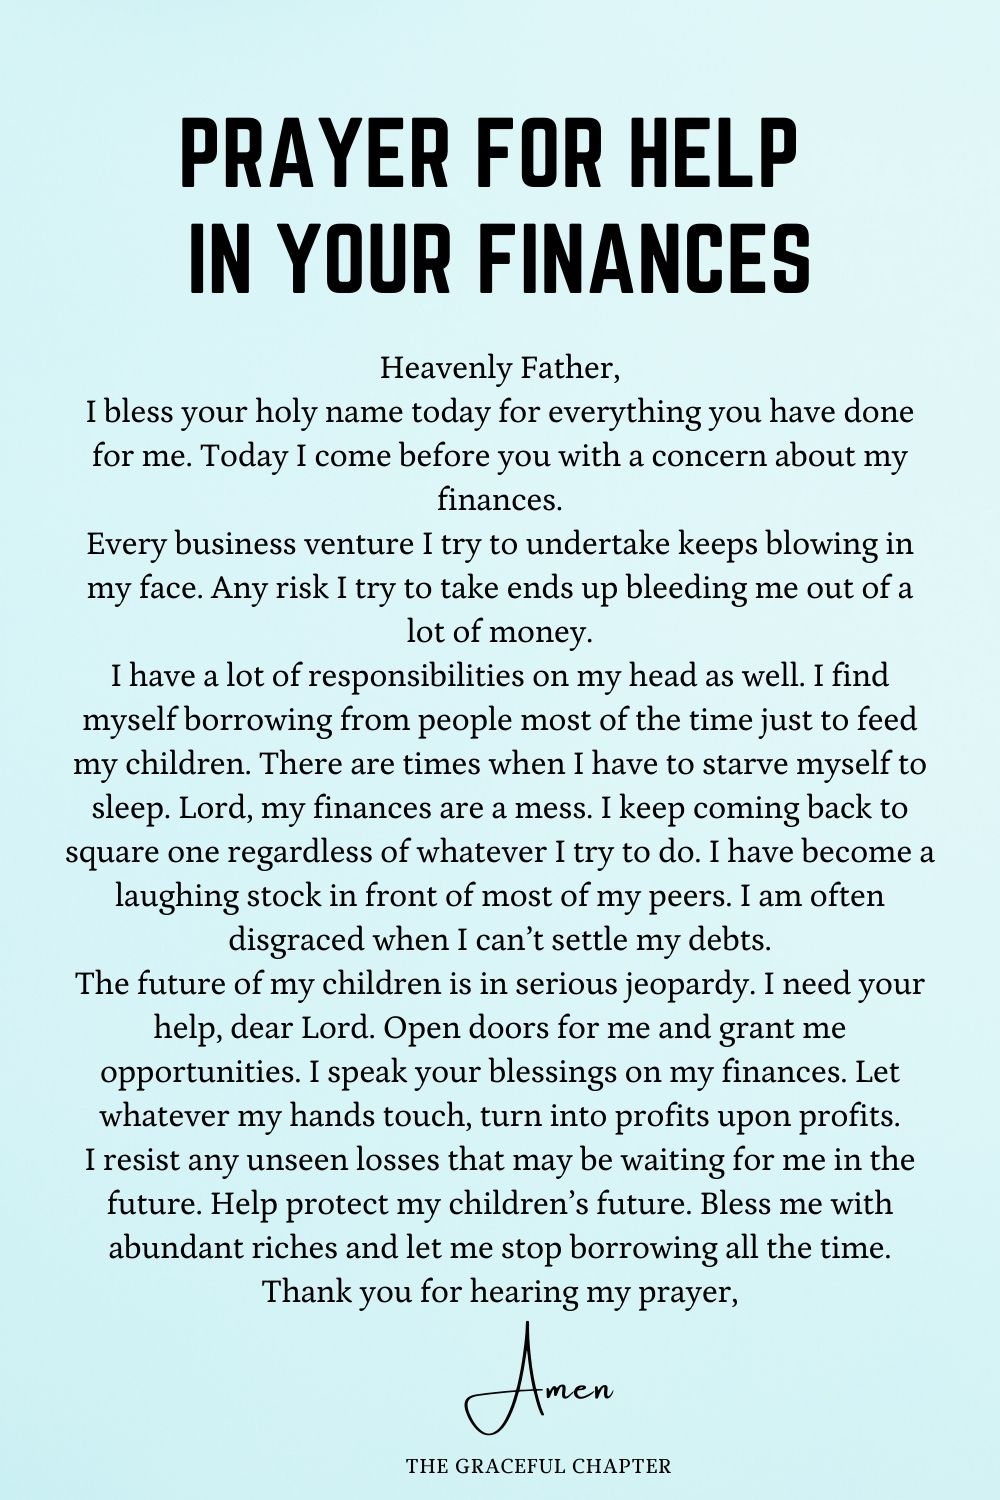 Prayers for help in your finances